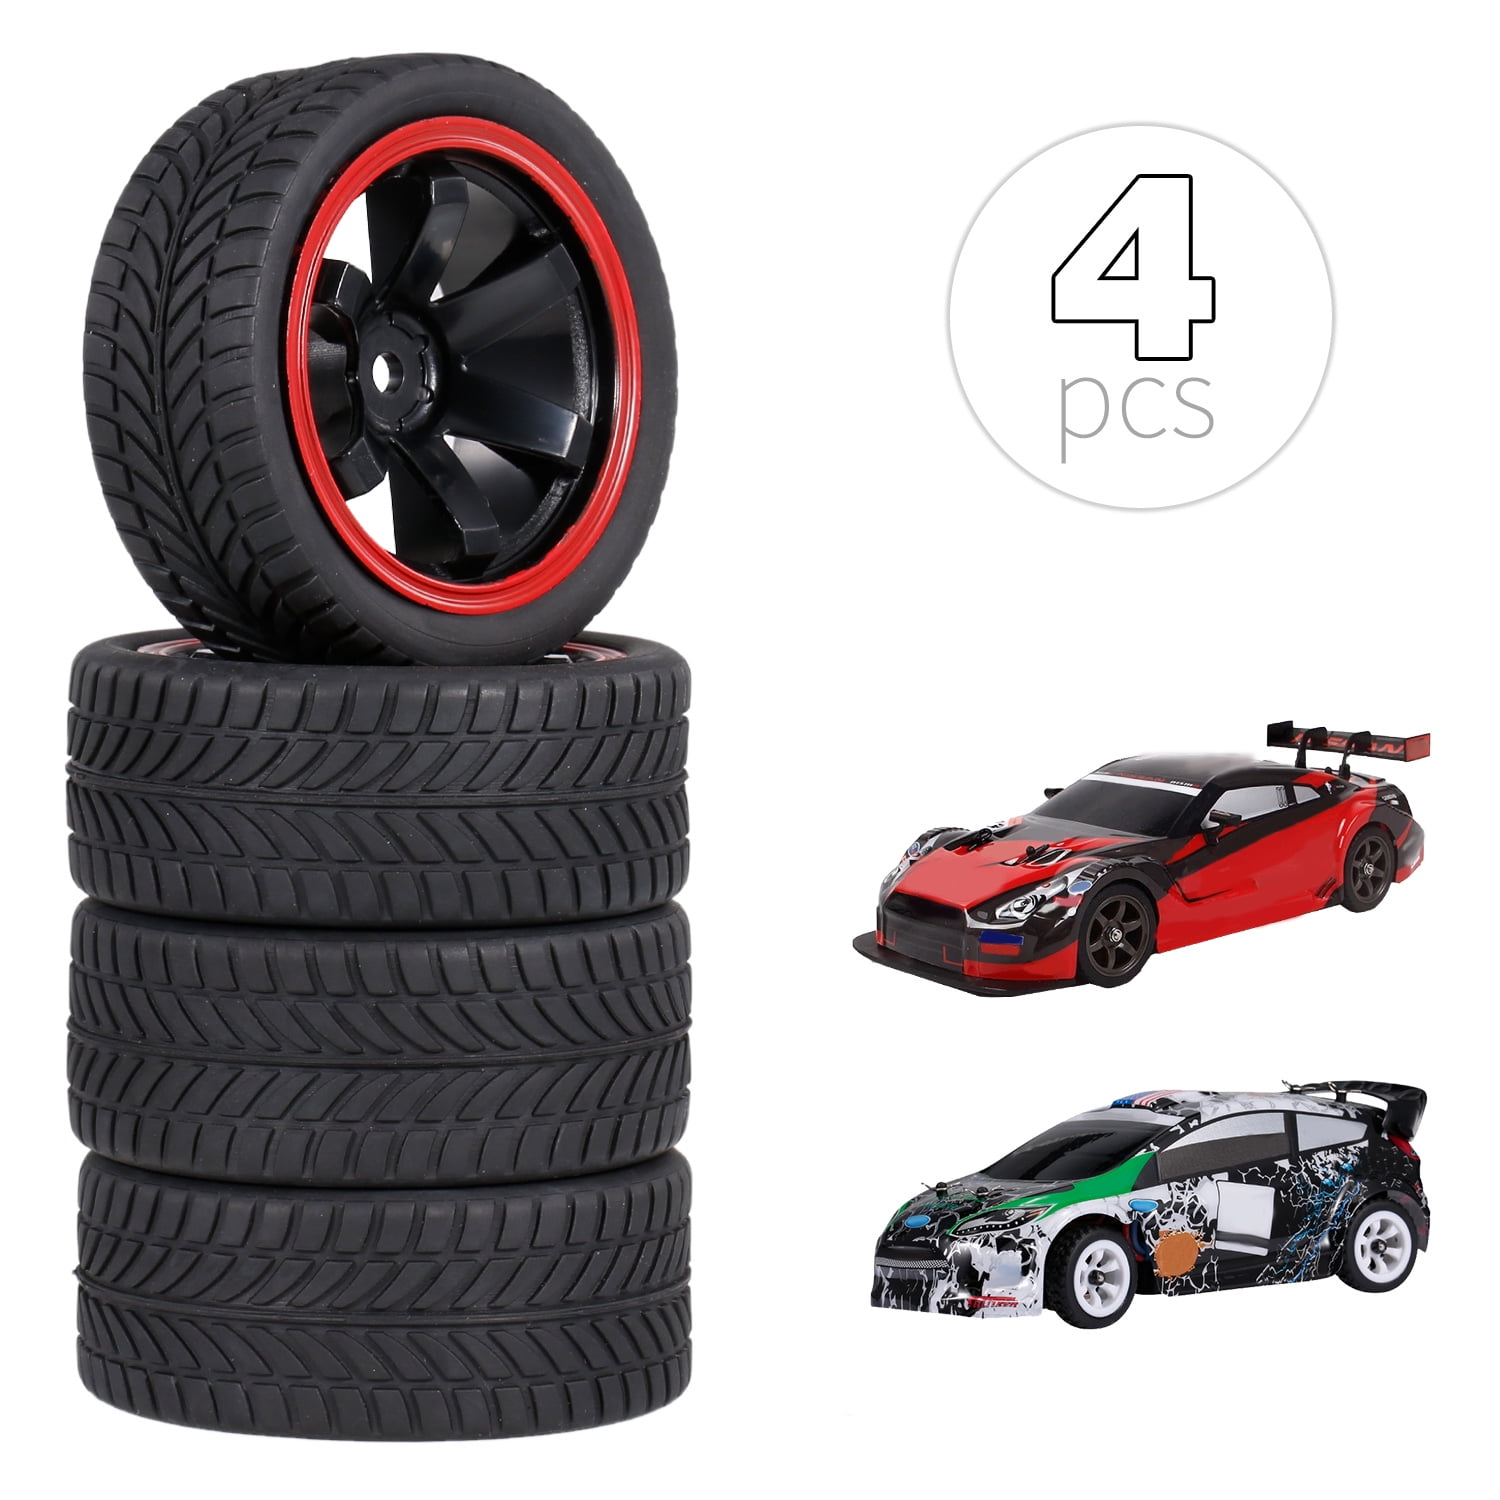 4pcs/Set Rubber Tyre Wheel Rims Model Vehicle Part for Hsp Redcat Exceed Rc Traxxas Tamiya Hpi 1:10 Racing Off-Road Car RC Racing Car Tires 01 